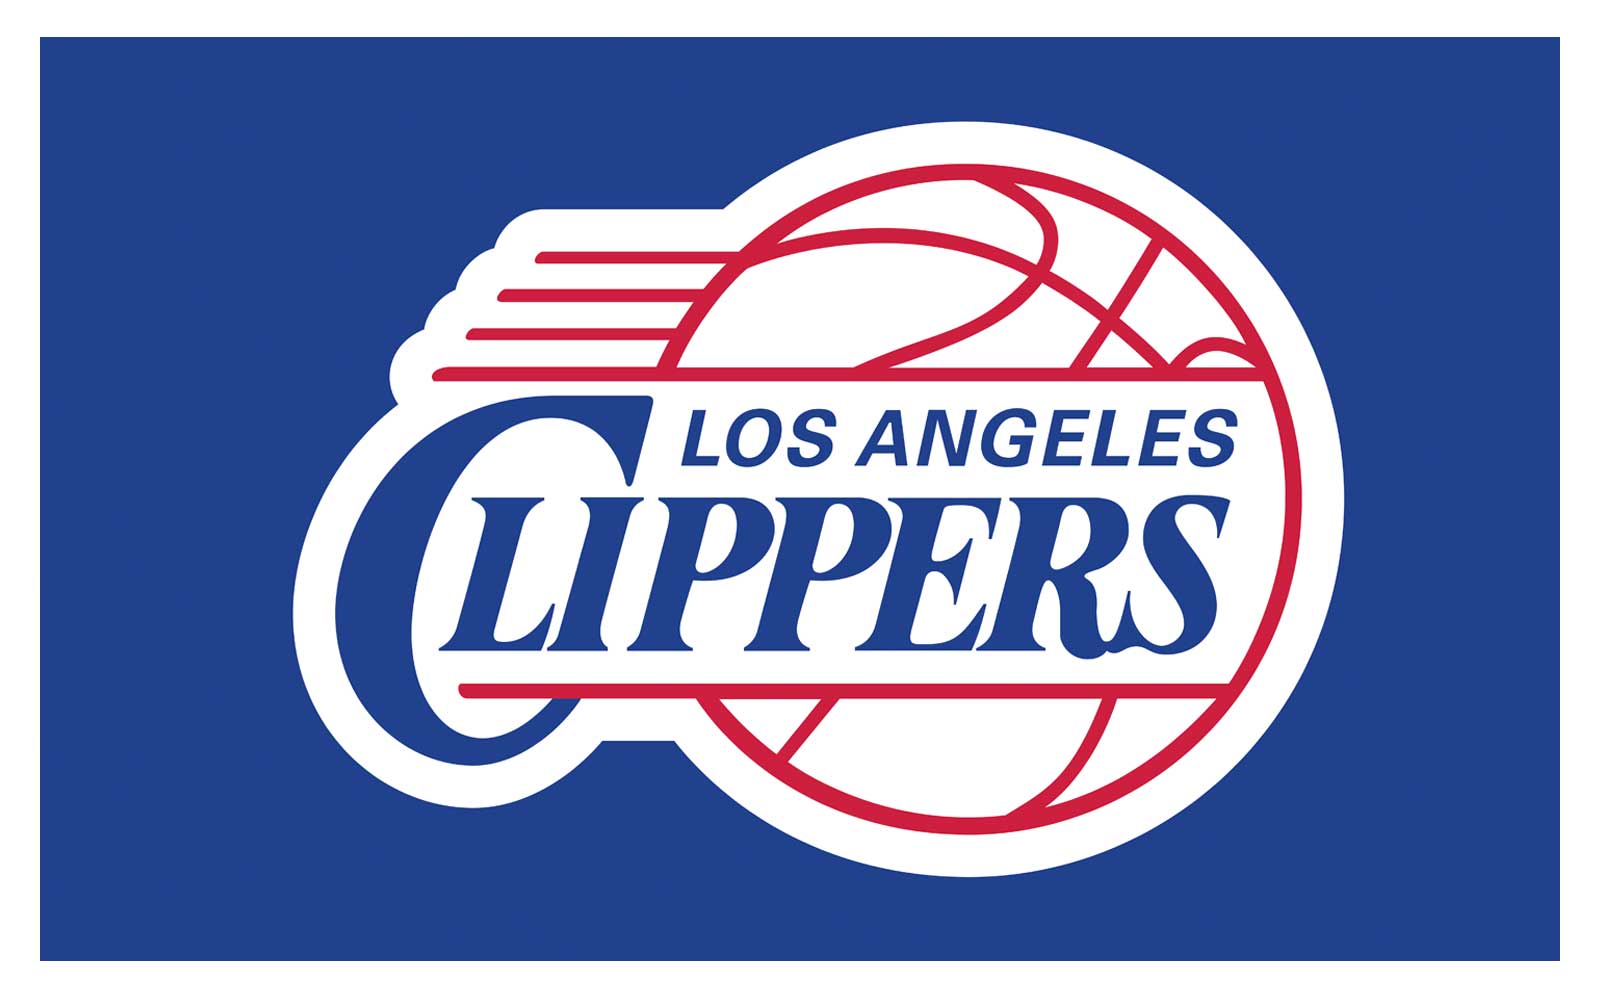 Los Angeles Clippers Wallpaper HD Background